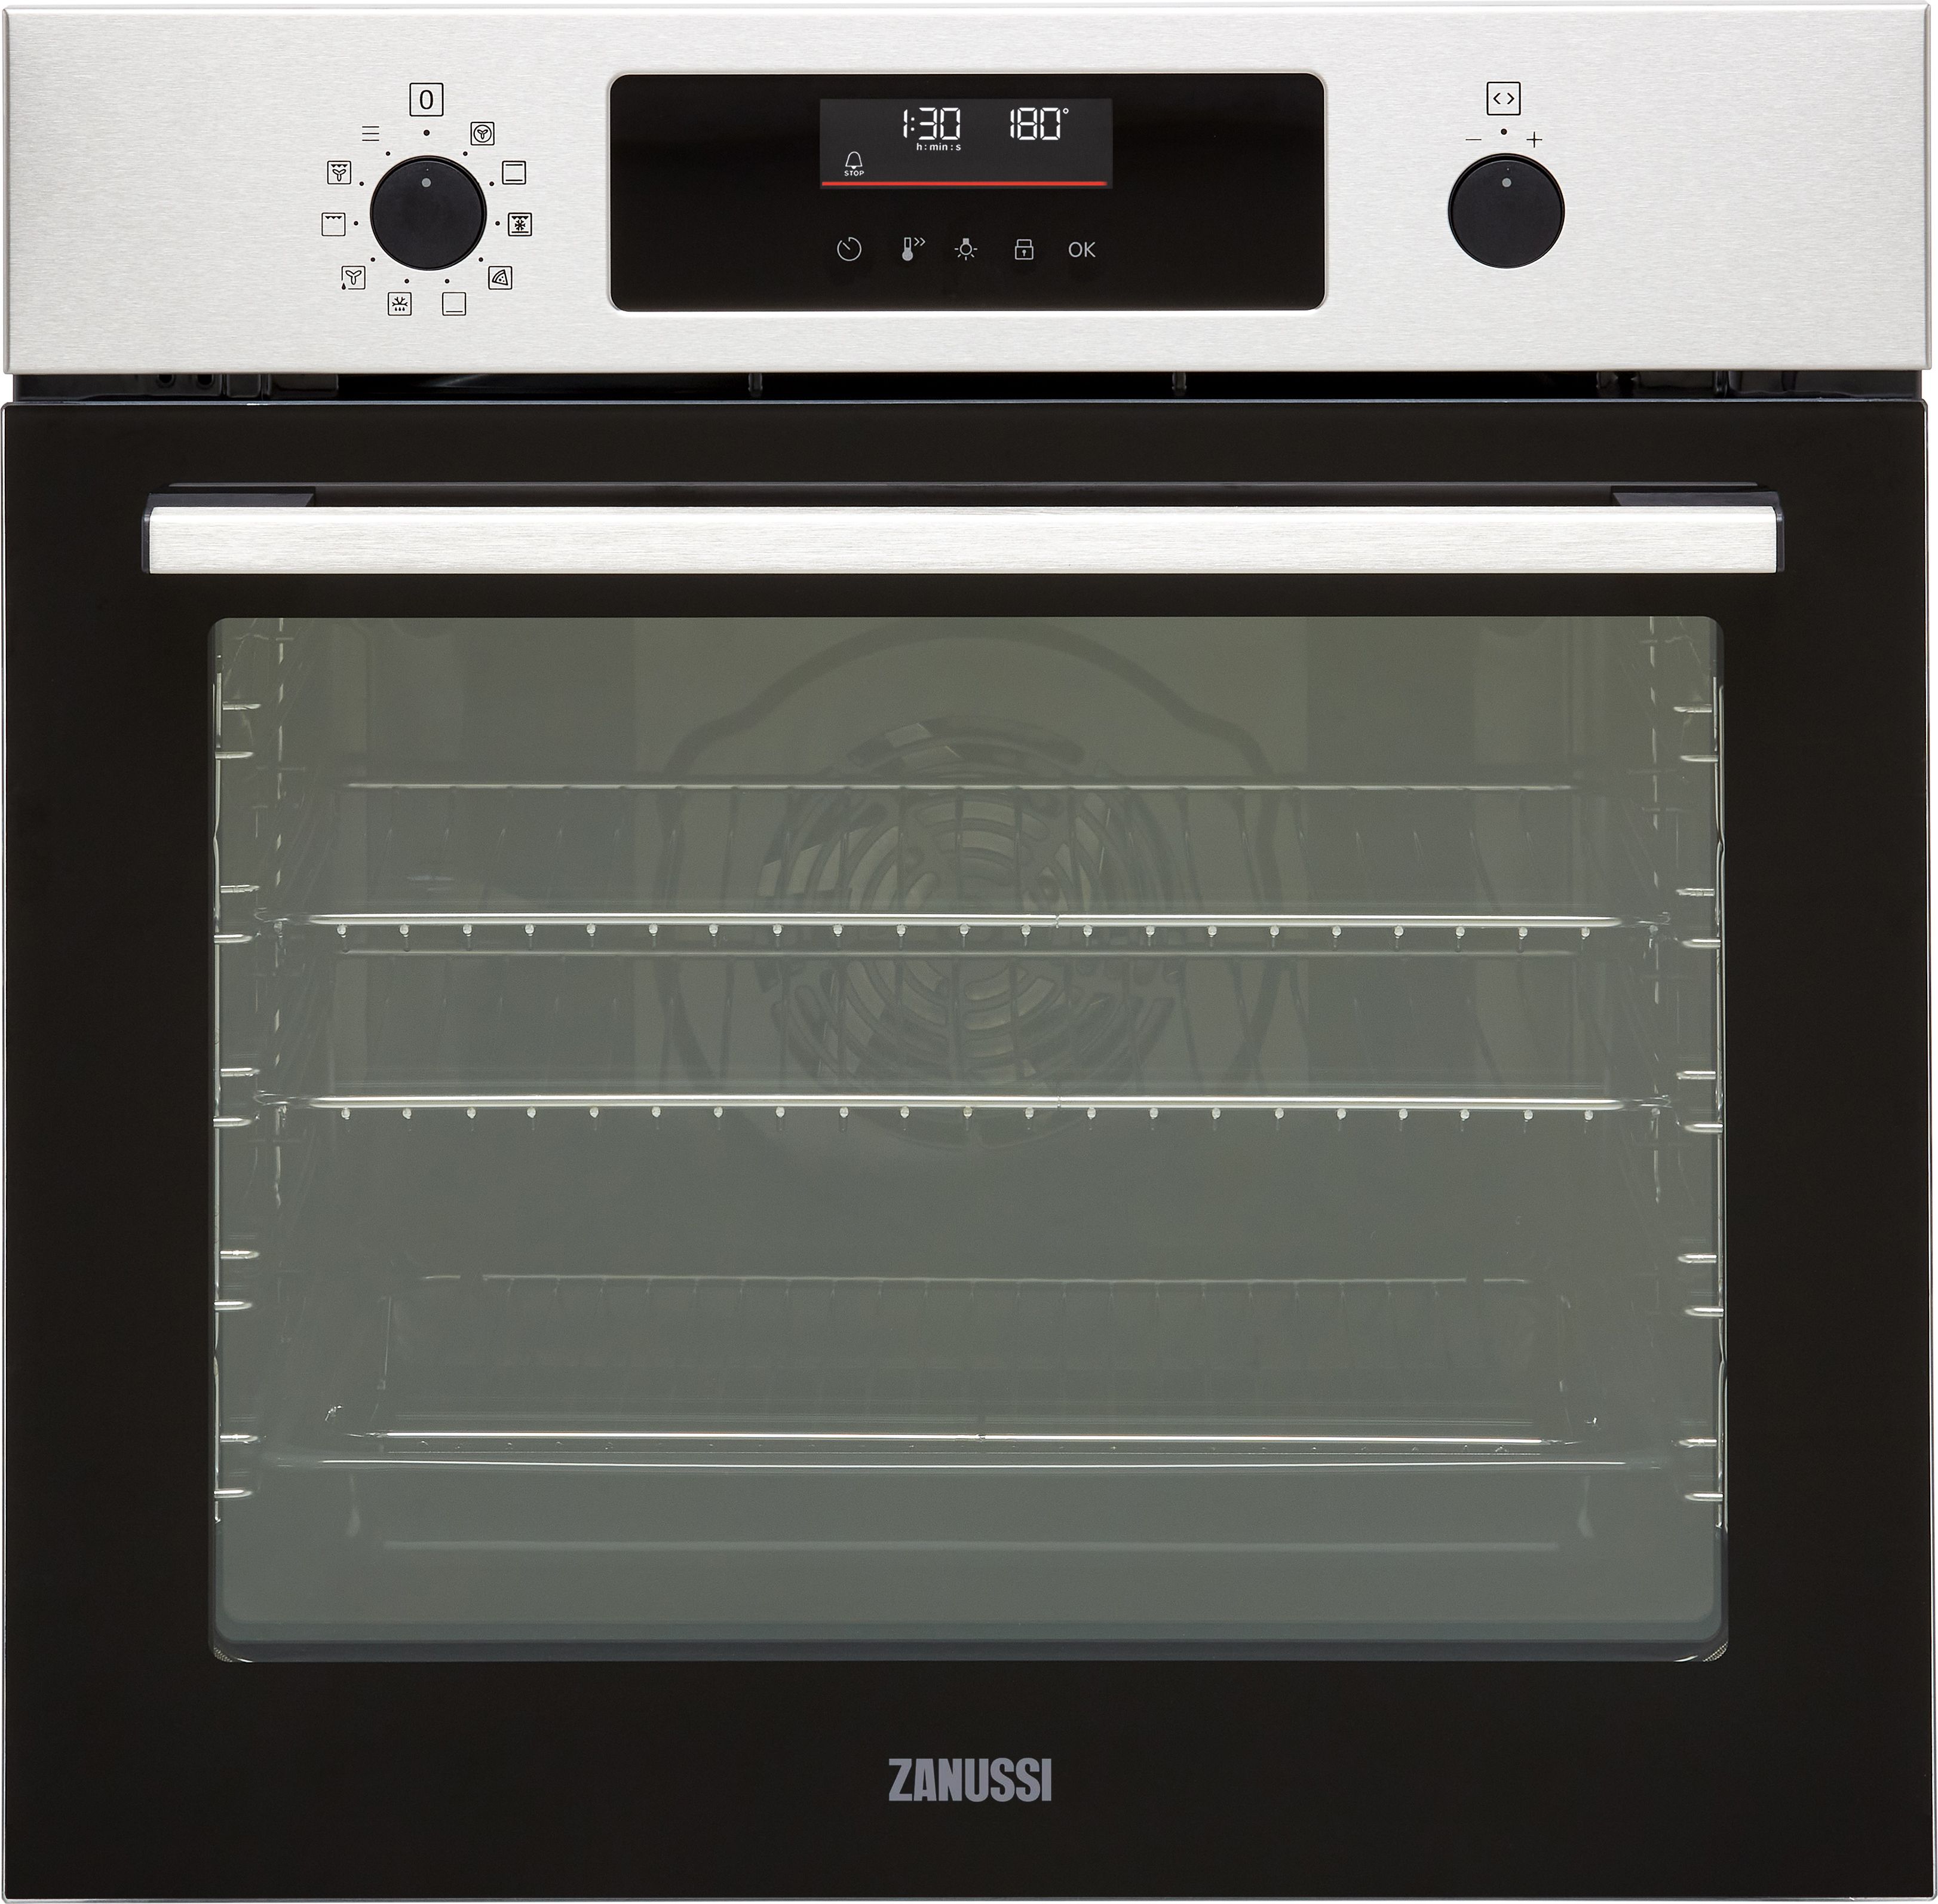 Zanussi ZOPNX6XN Built In Electric Single Oven with Pyrolytic Cleaning - Stainless Steel / Black - A+ Rated, Stainless Steel